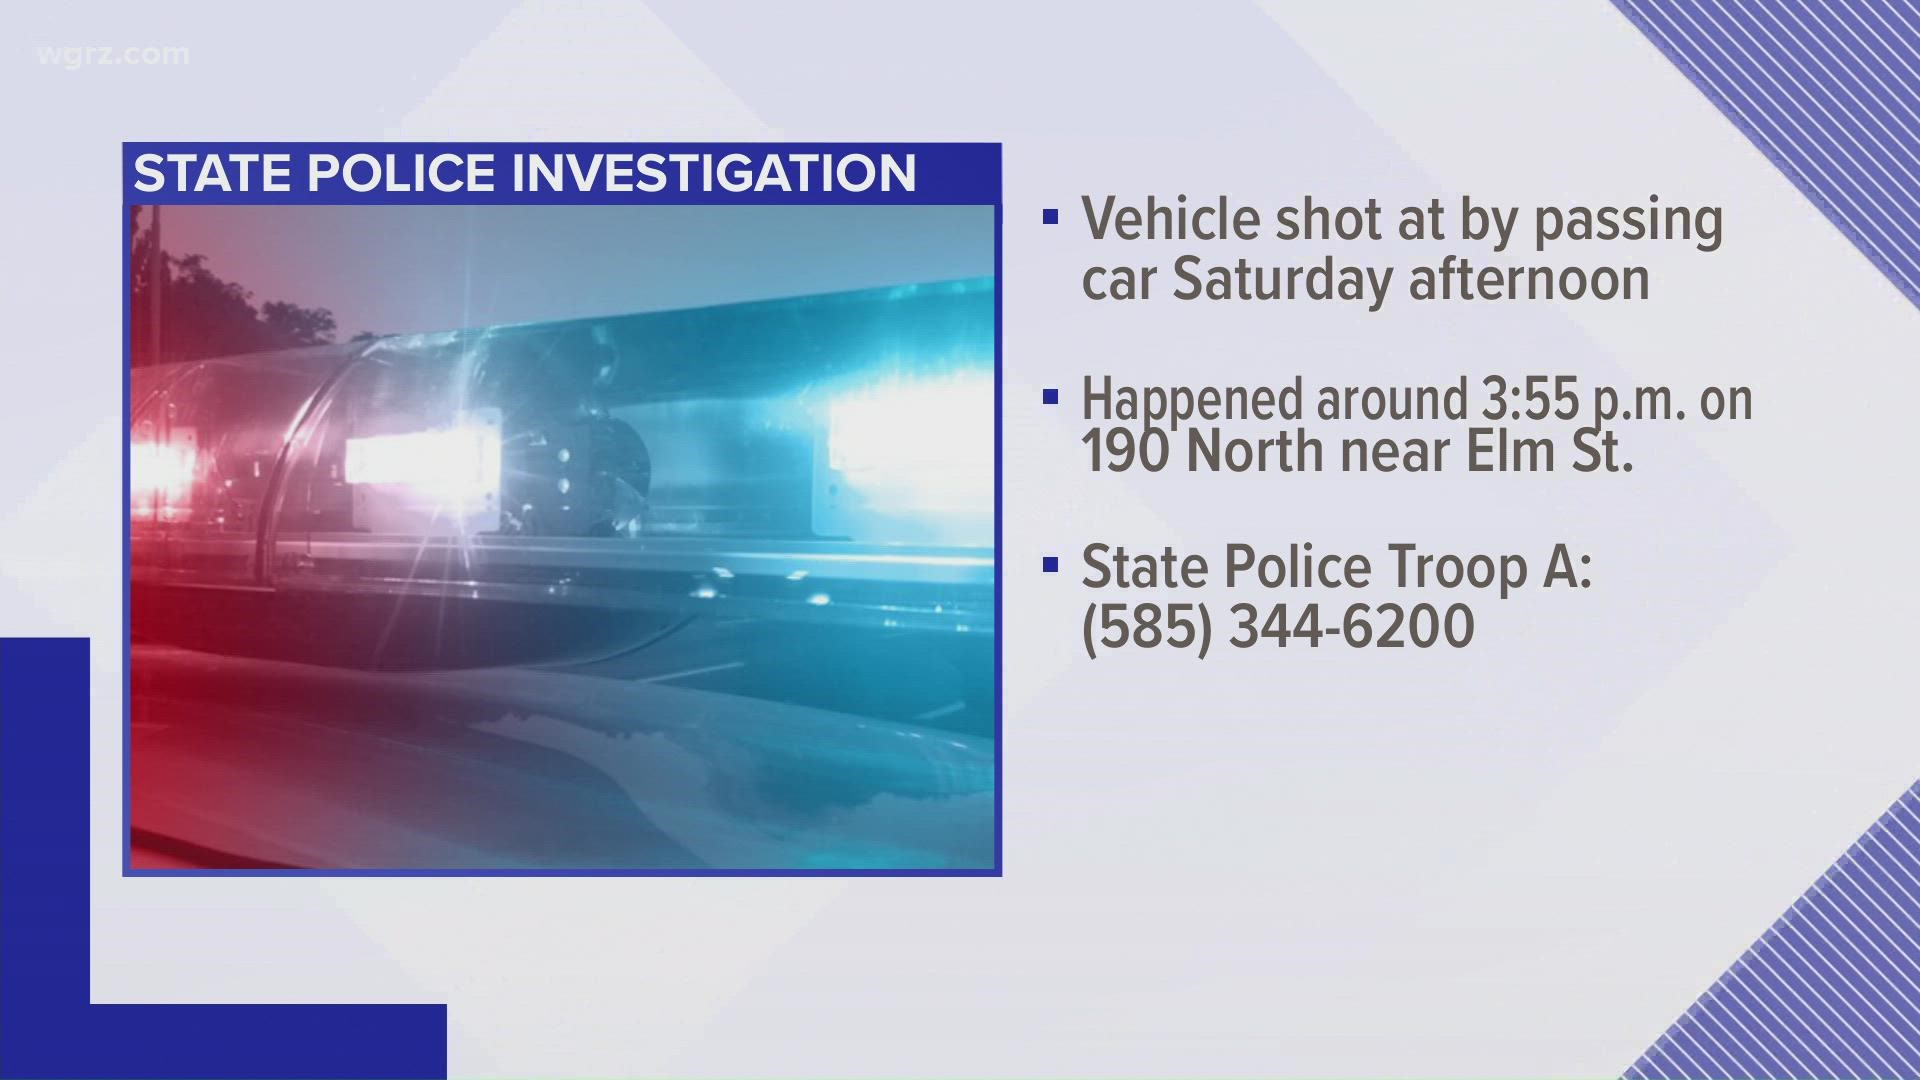 State Police are asking for help after a vehicle was shot at by a passing car Saturday afternoon on the 190 northbound.